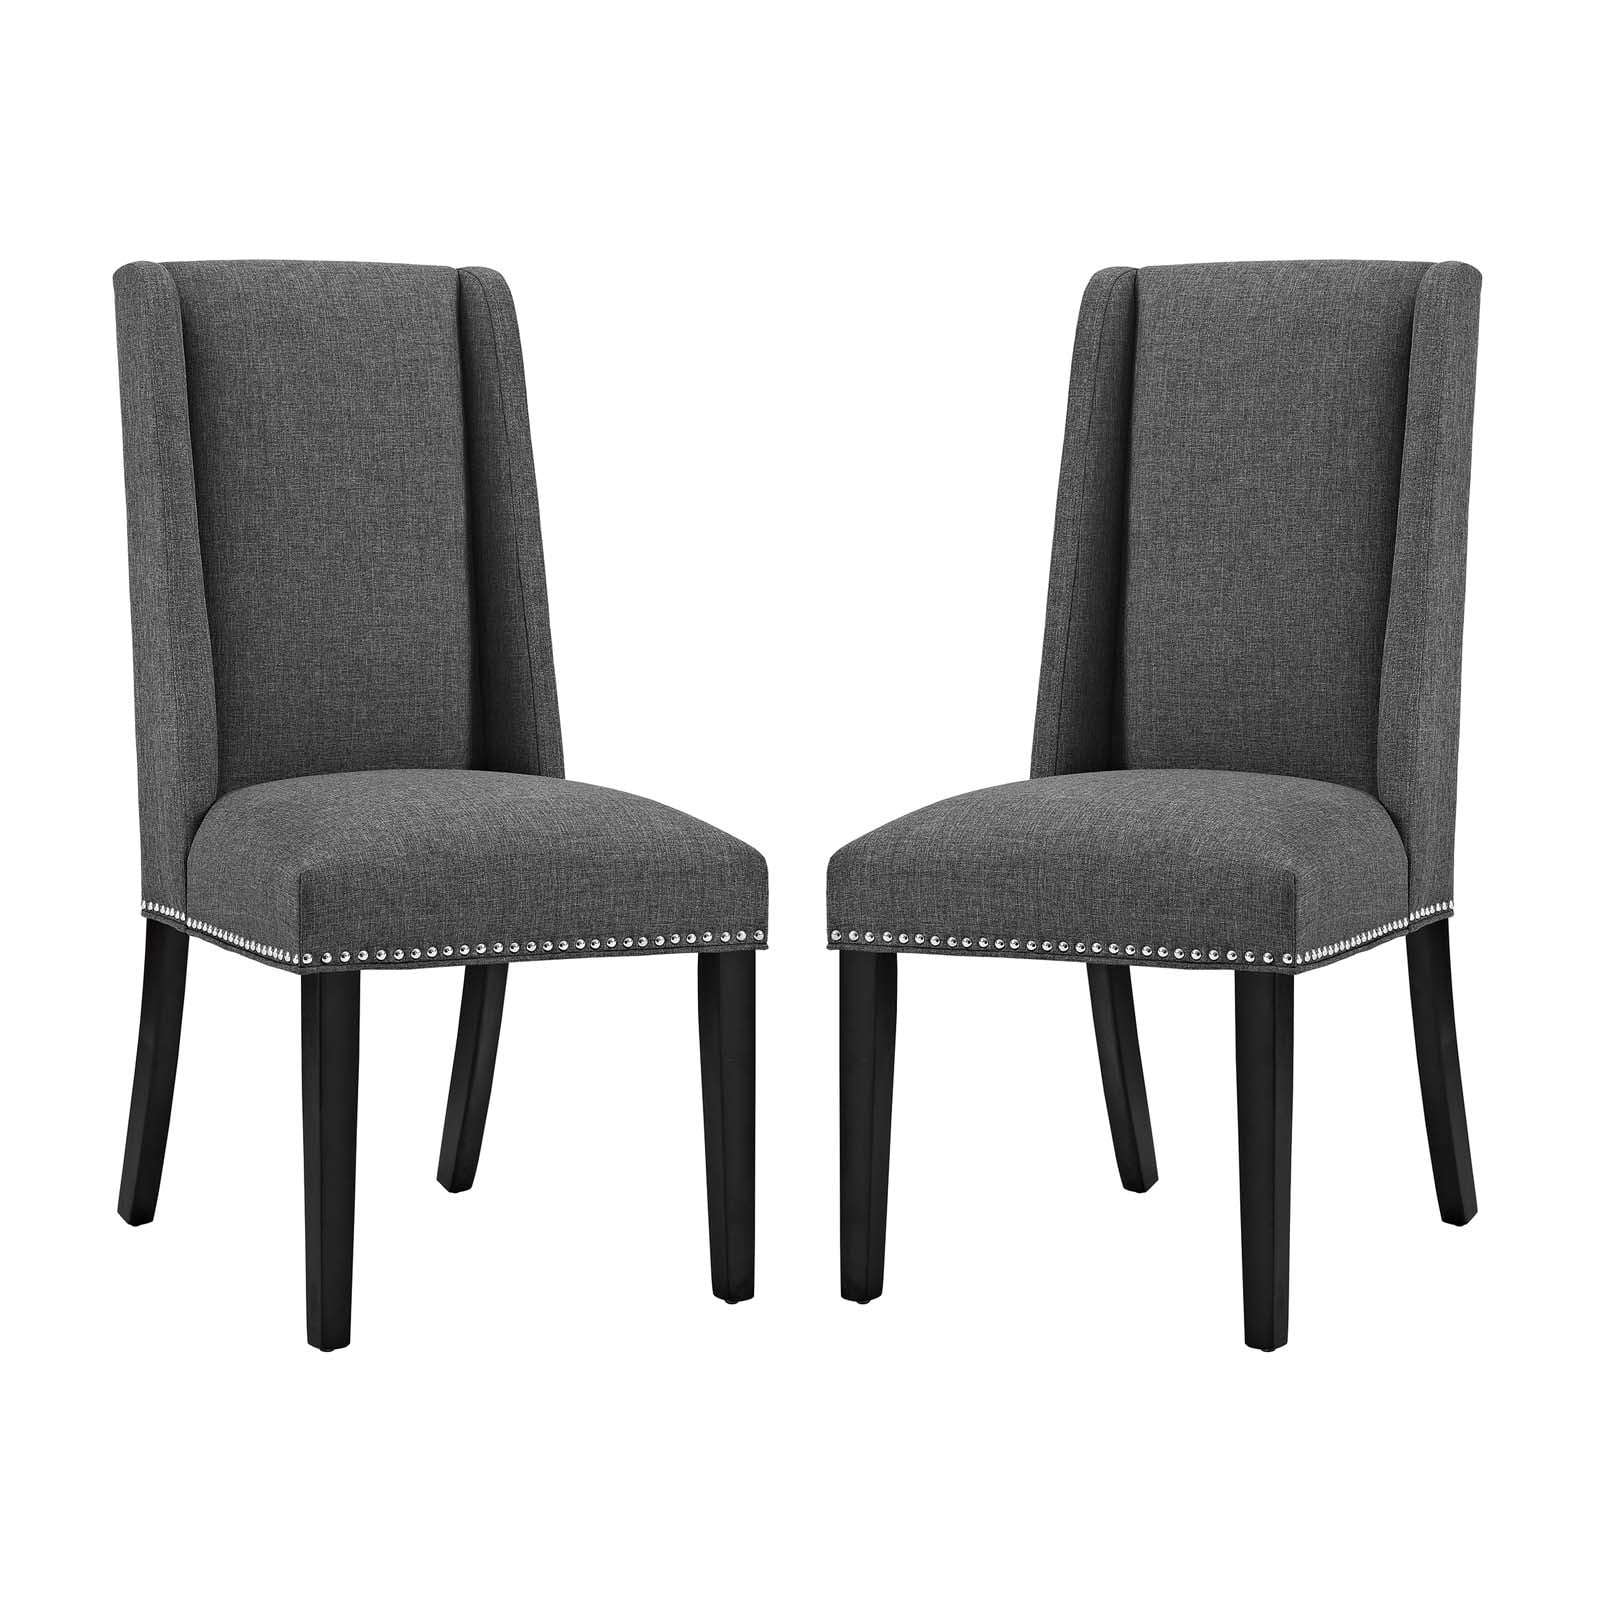 Modway Baron Dining Chair Fabric Set Of 2 In Gray